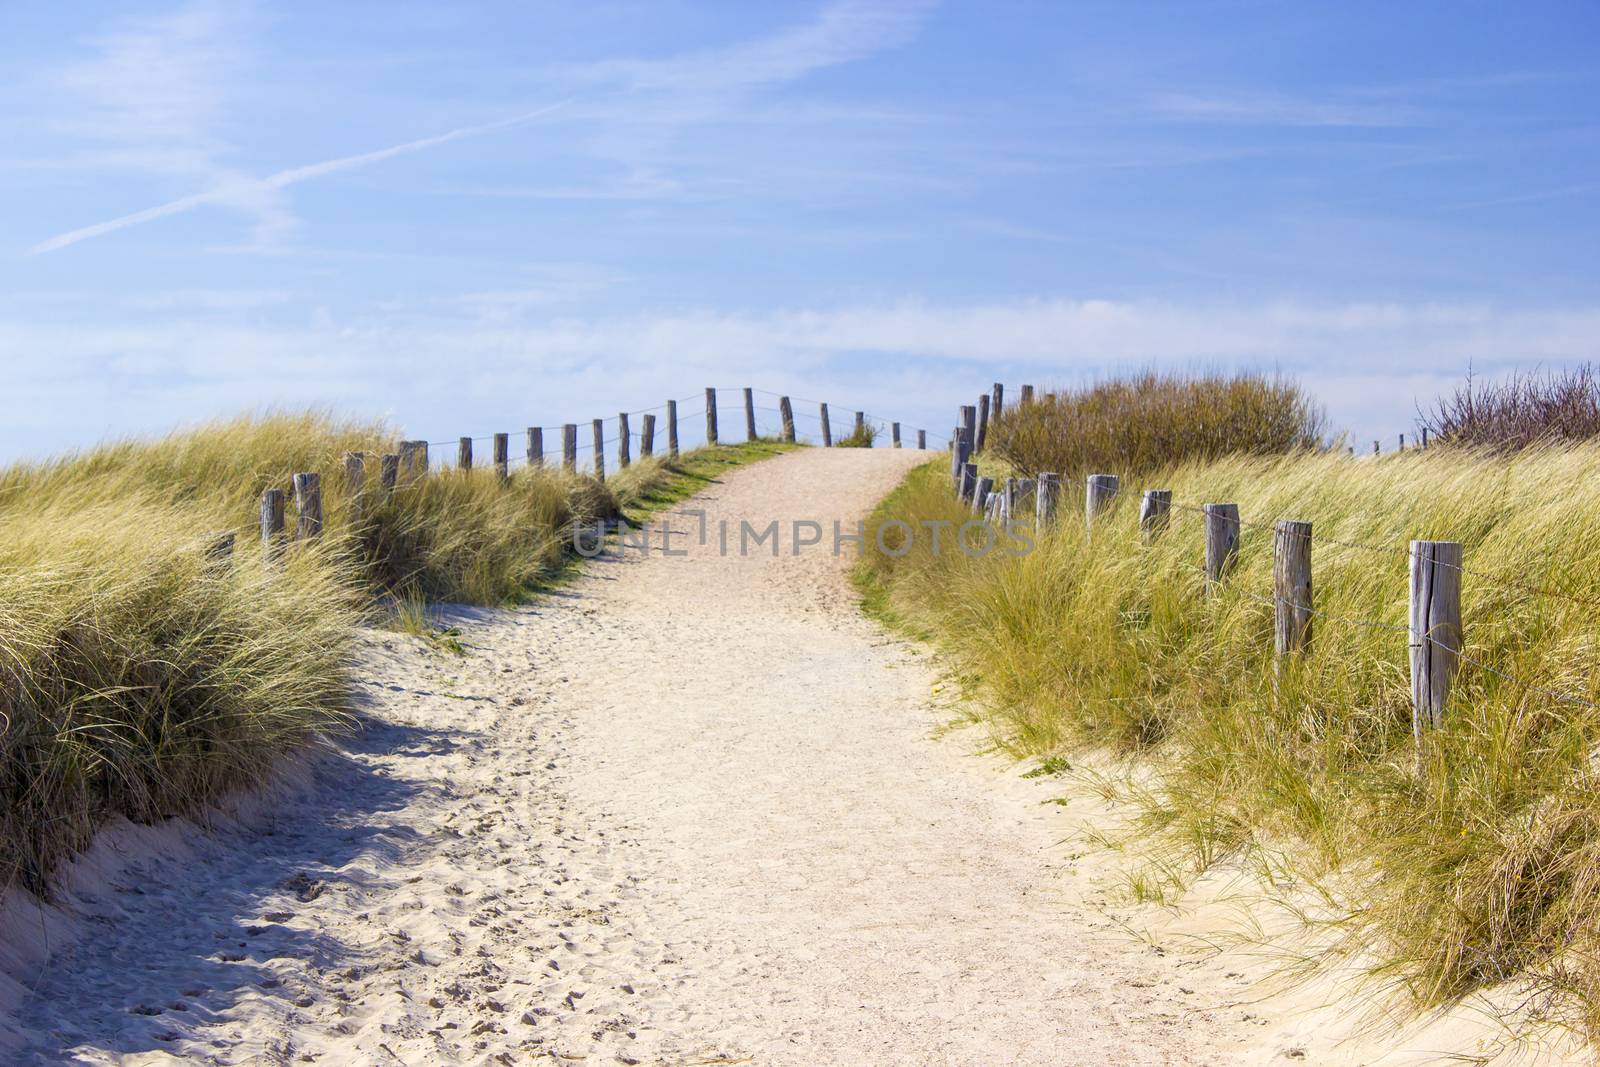  Path trough the dunes, Zoutelande, the Netherlands by miradrozdowski